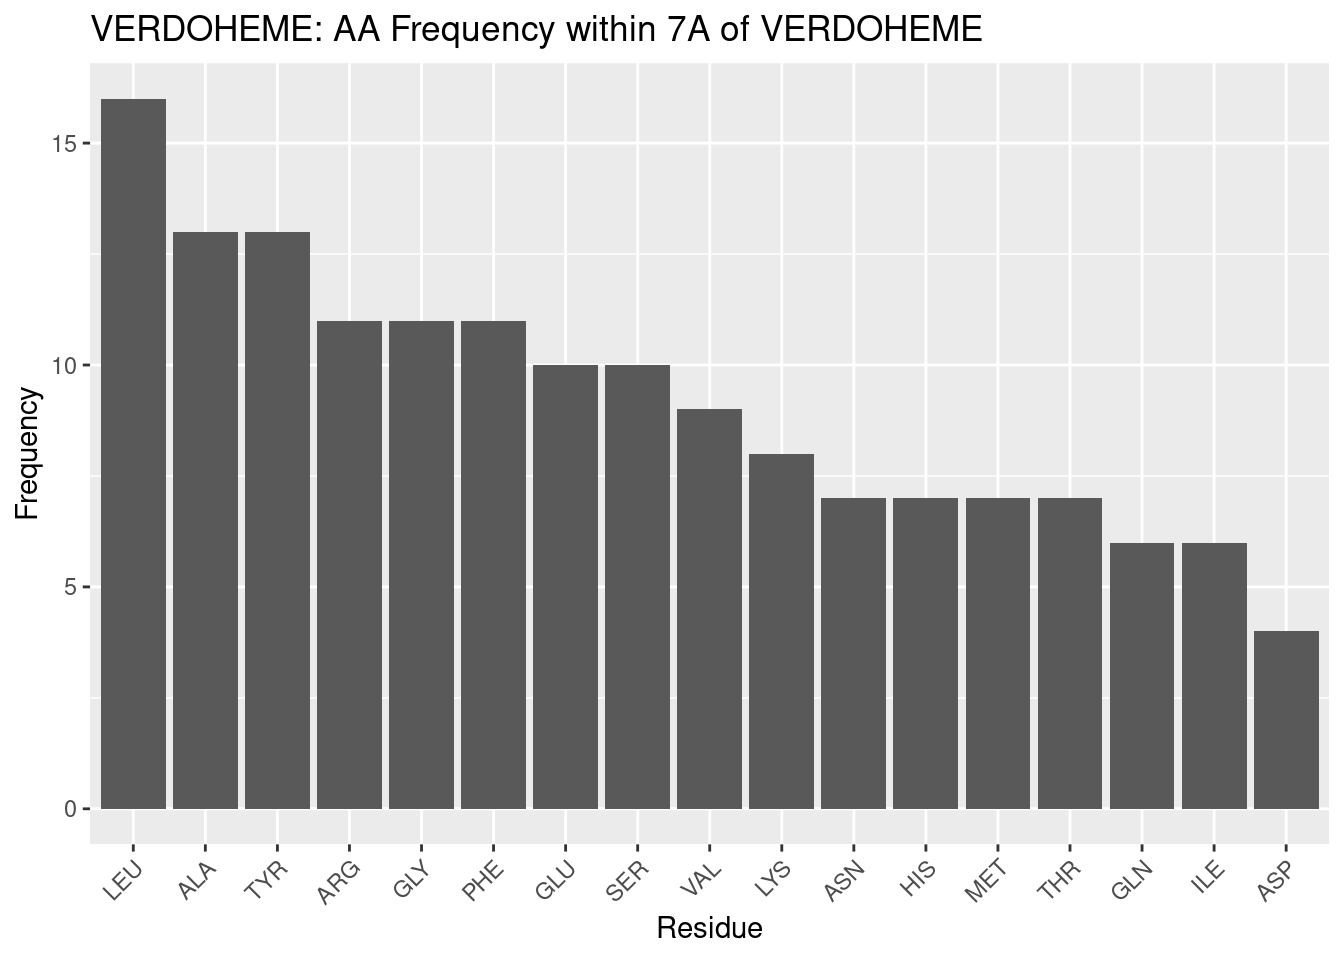 VERDOHEME: AA Frequency within 7A